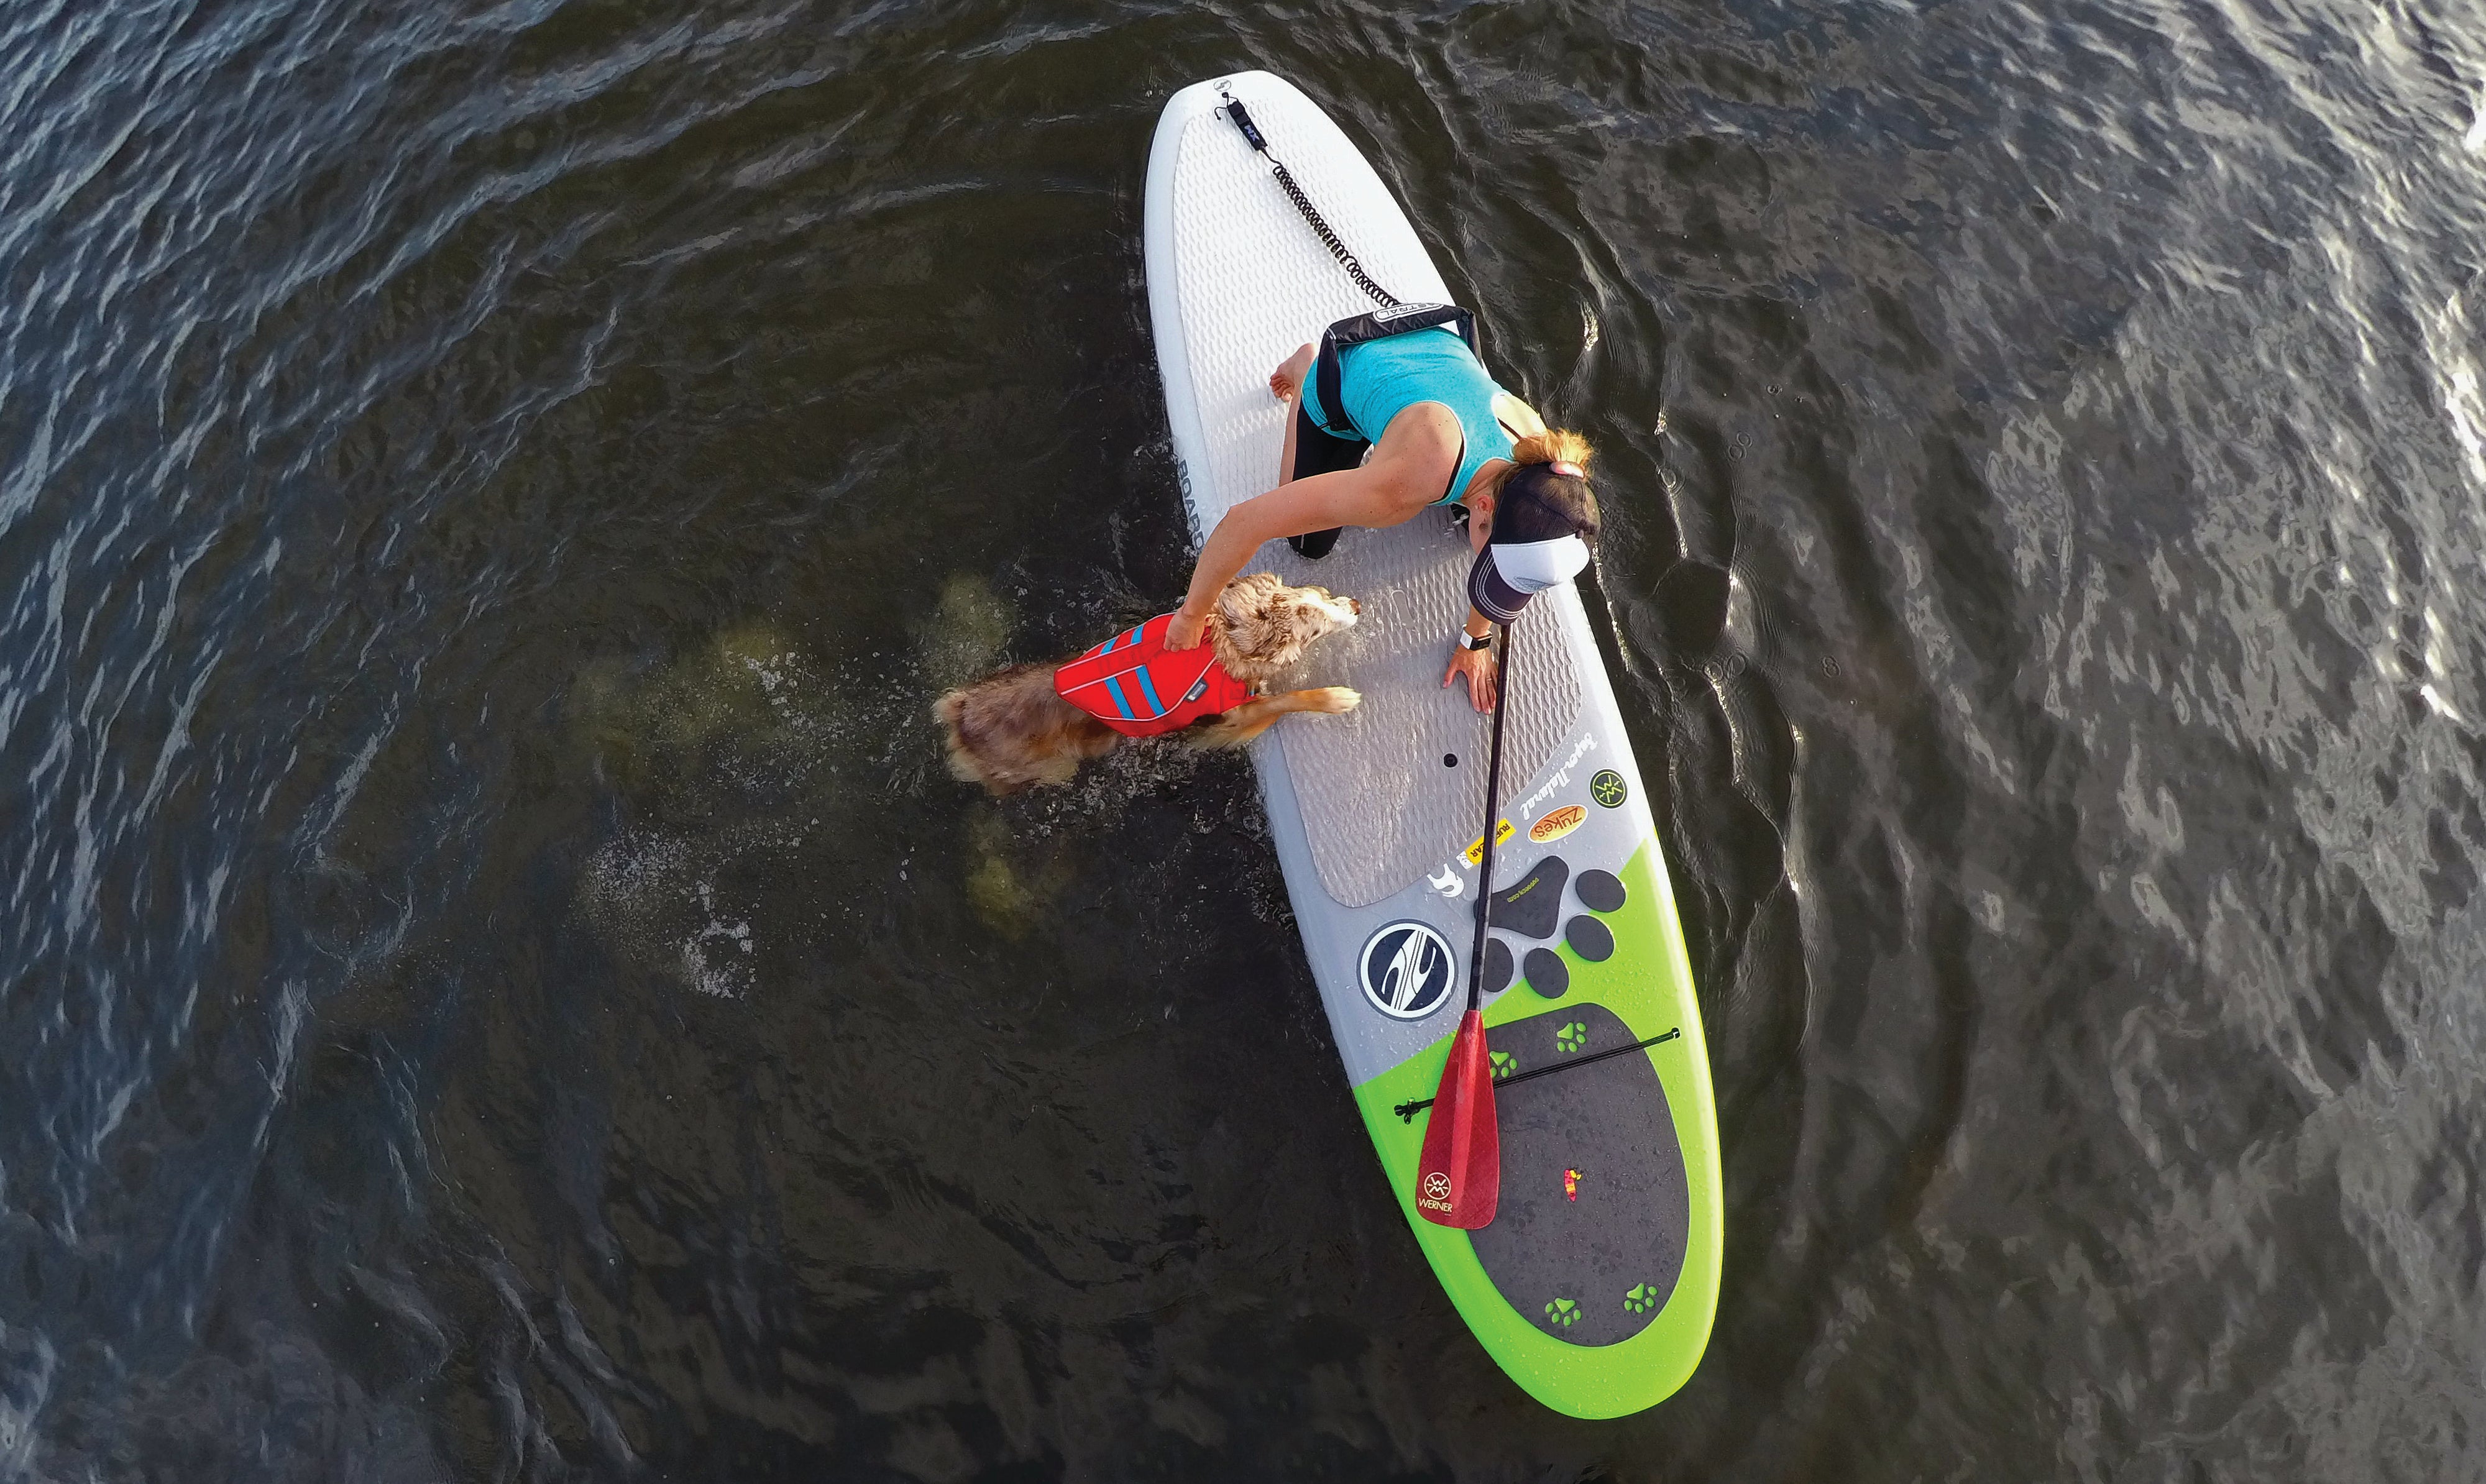 Maria helps Bodie back onto paddleboard using the float coat handle.